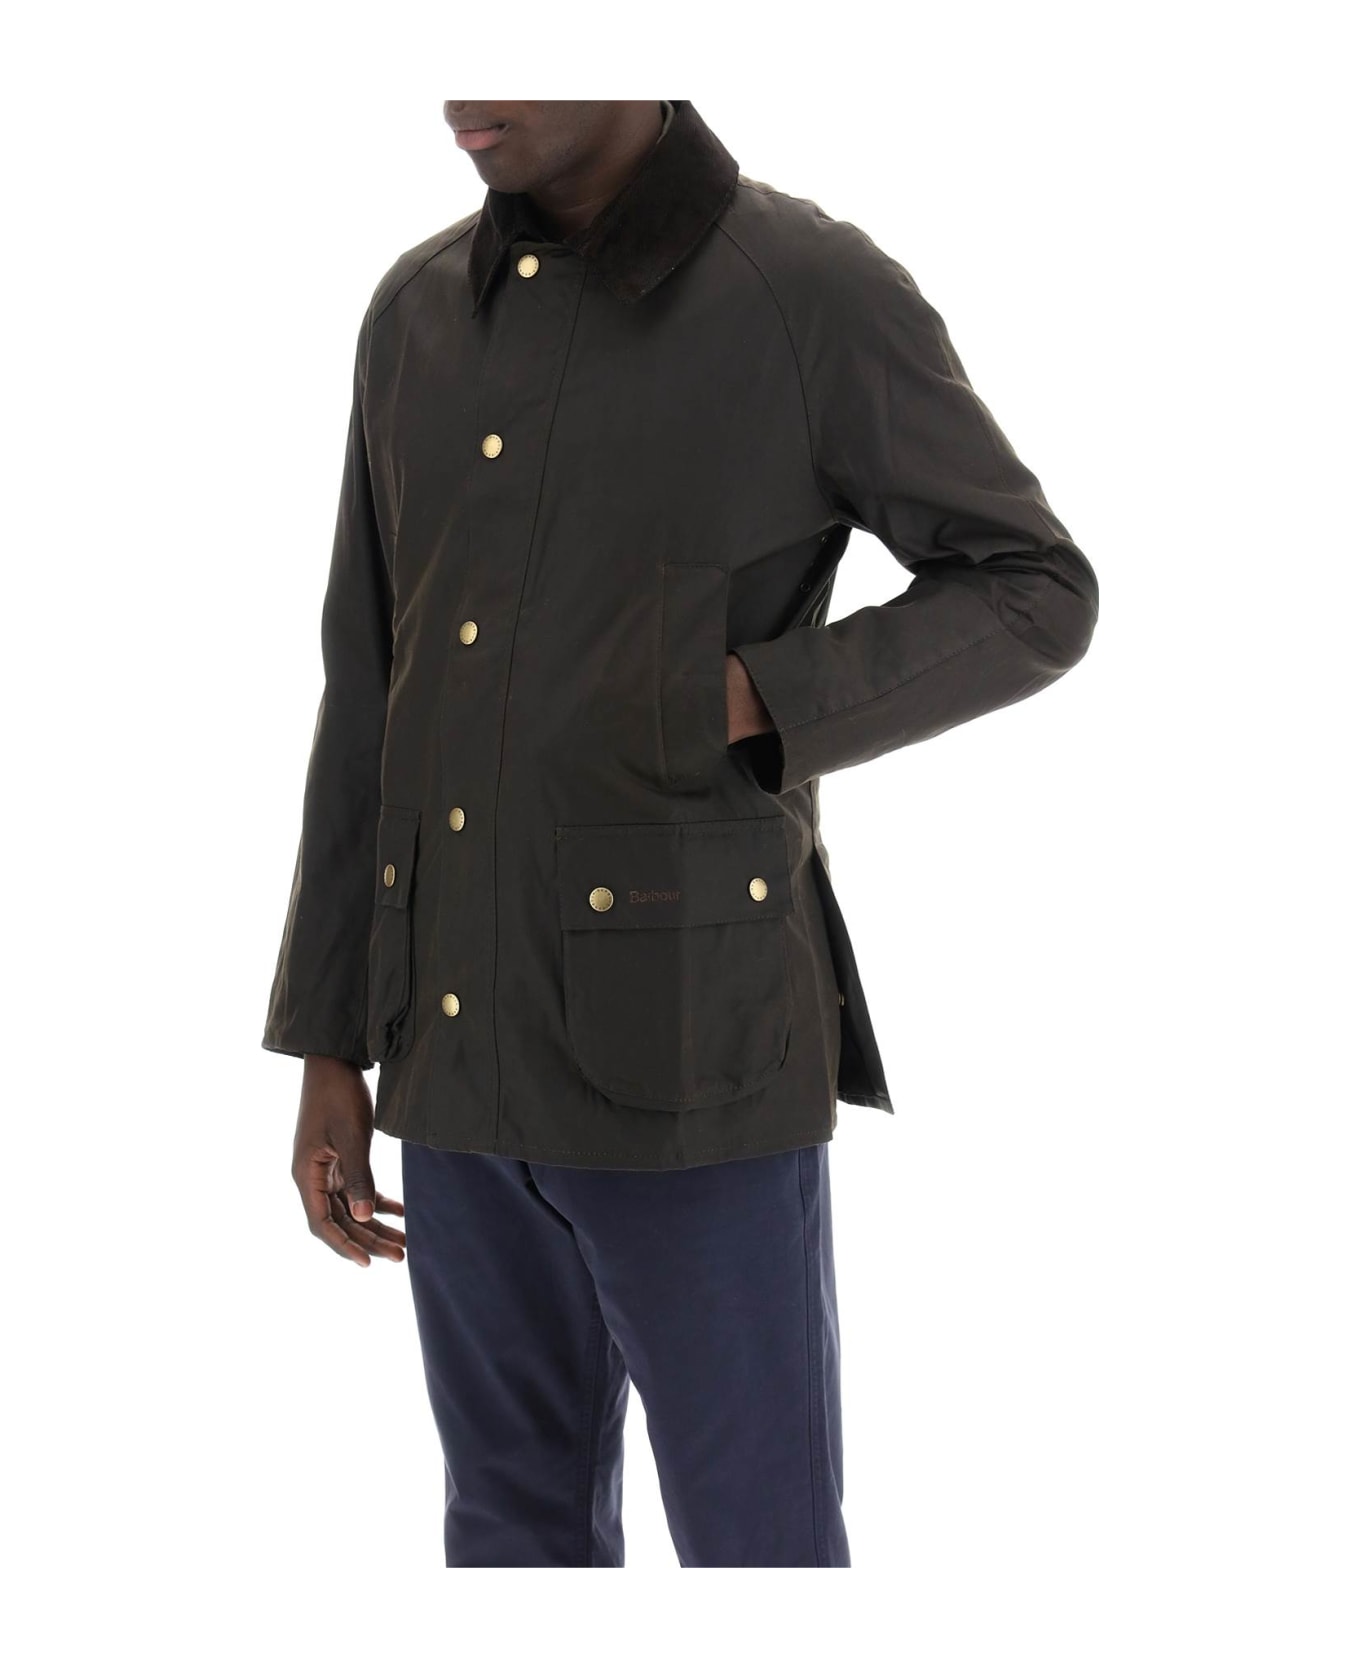 Barbour Ashby Waxed Jacket - OLIVE (Green) ジャケット